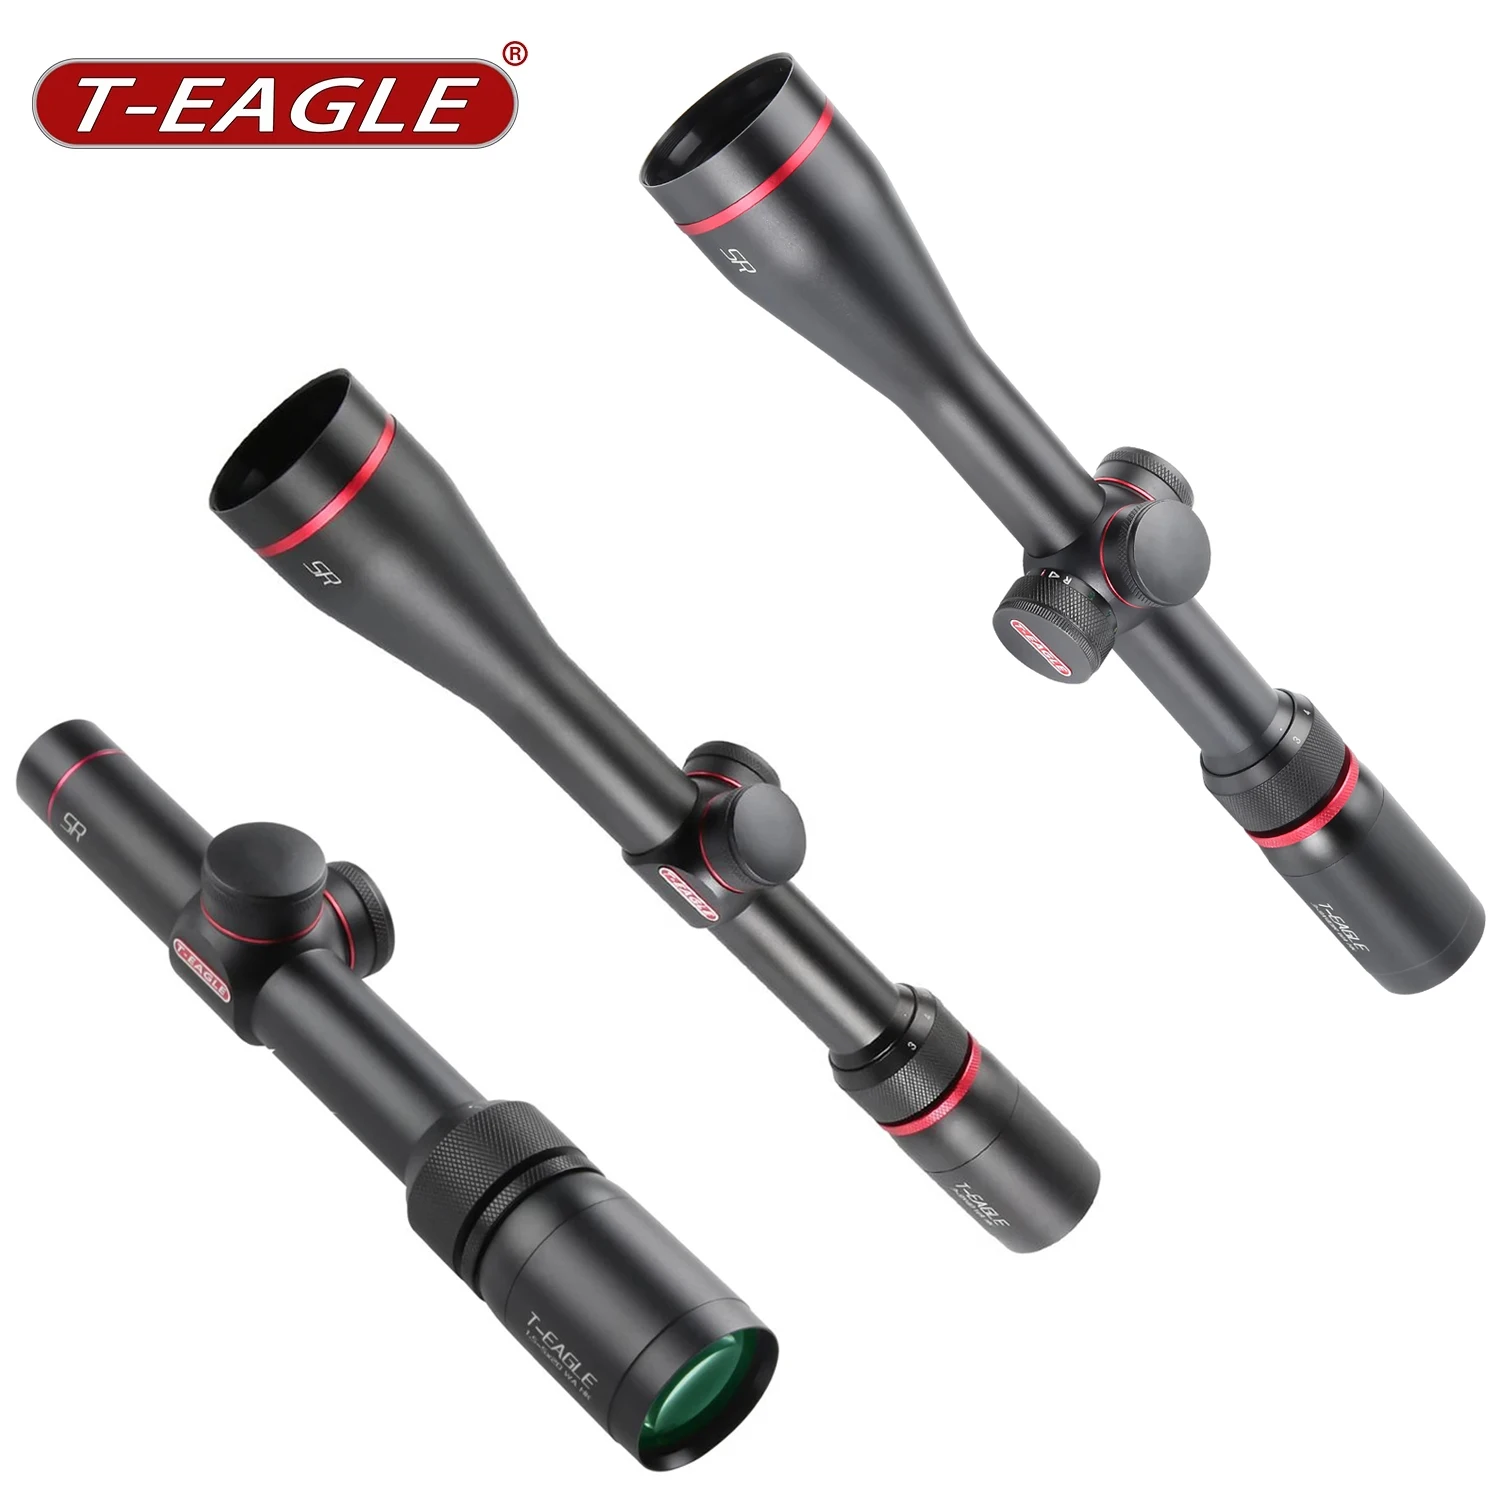 T-EAGLE Series Hunting RiflesScope Tactical Rifle Scope Optical Gun Sight  Shock Proof with Cover Glass Reticle